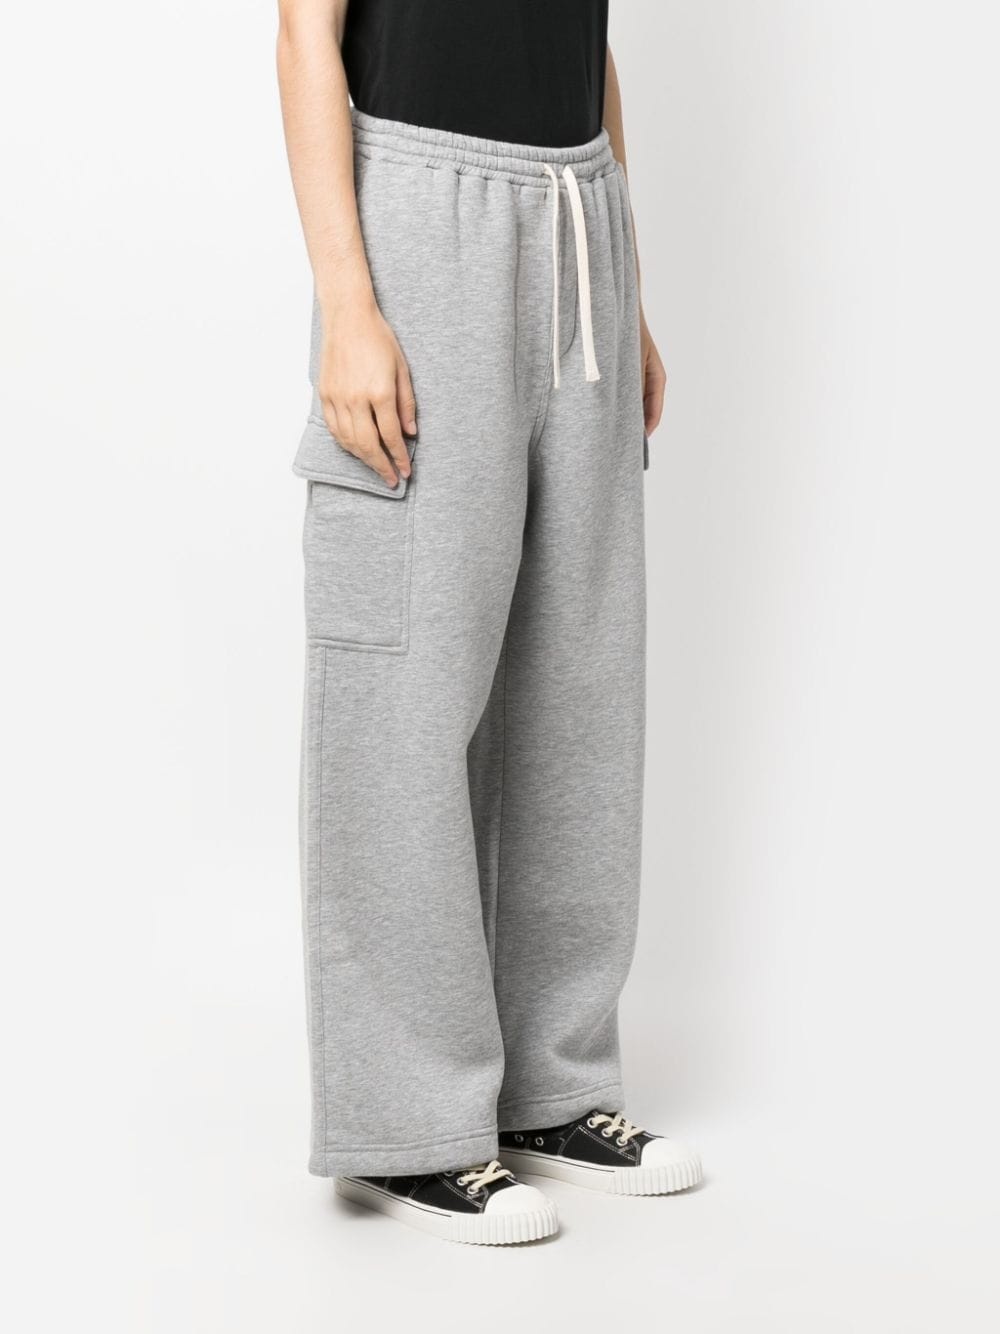 smiley-face track trousers - 3